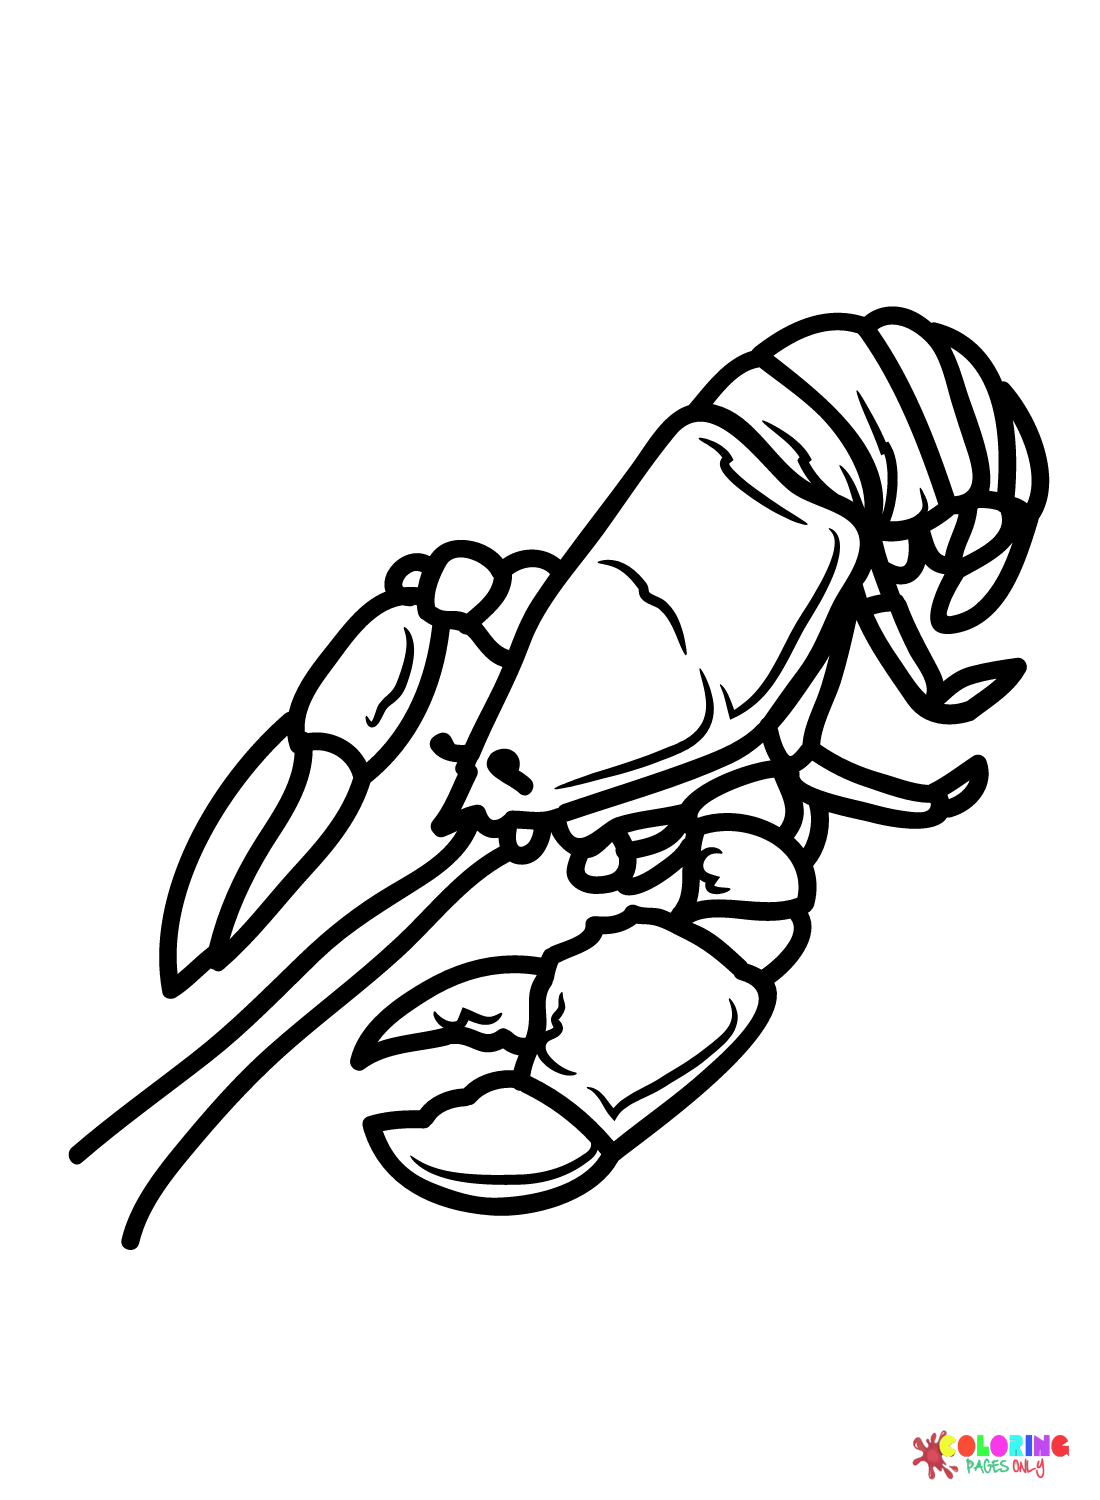 Lobster Images Coloring Page